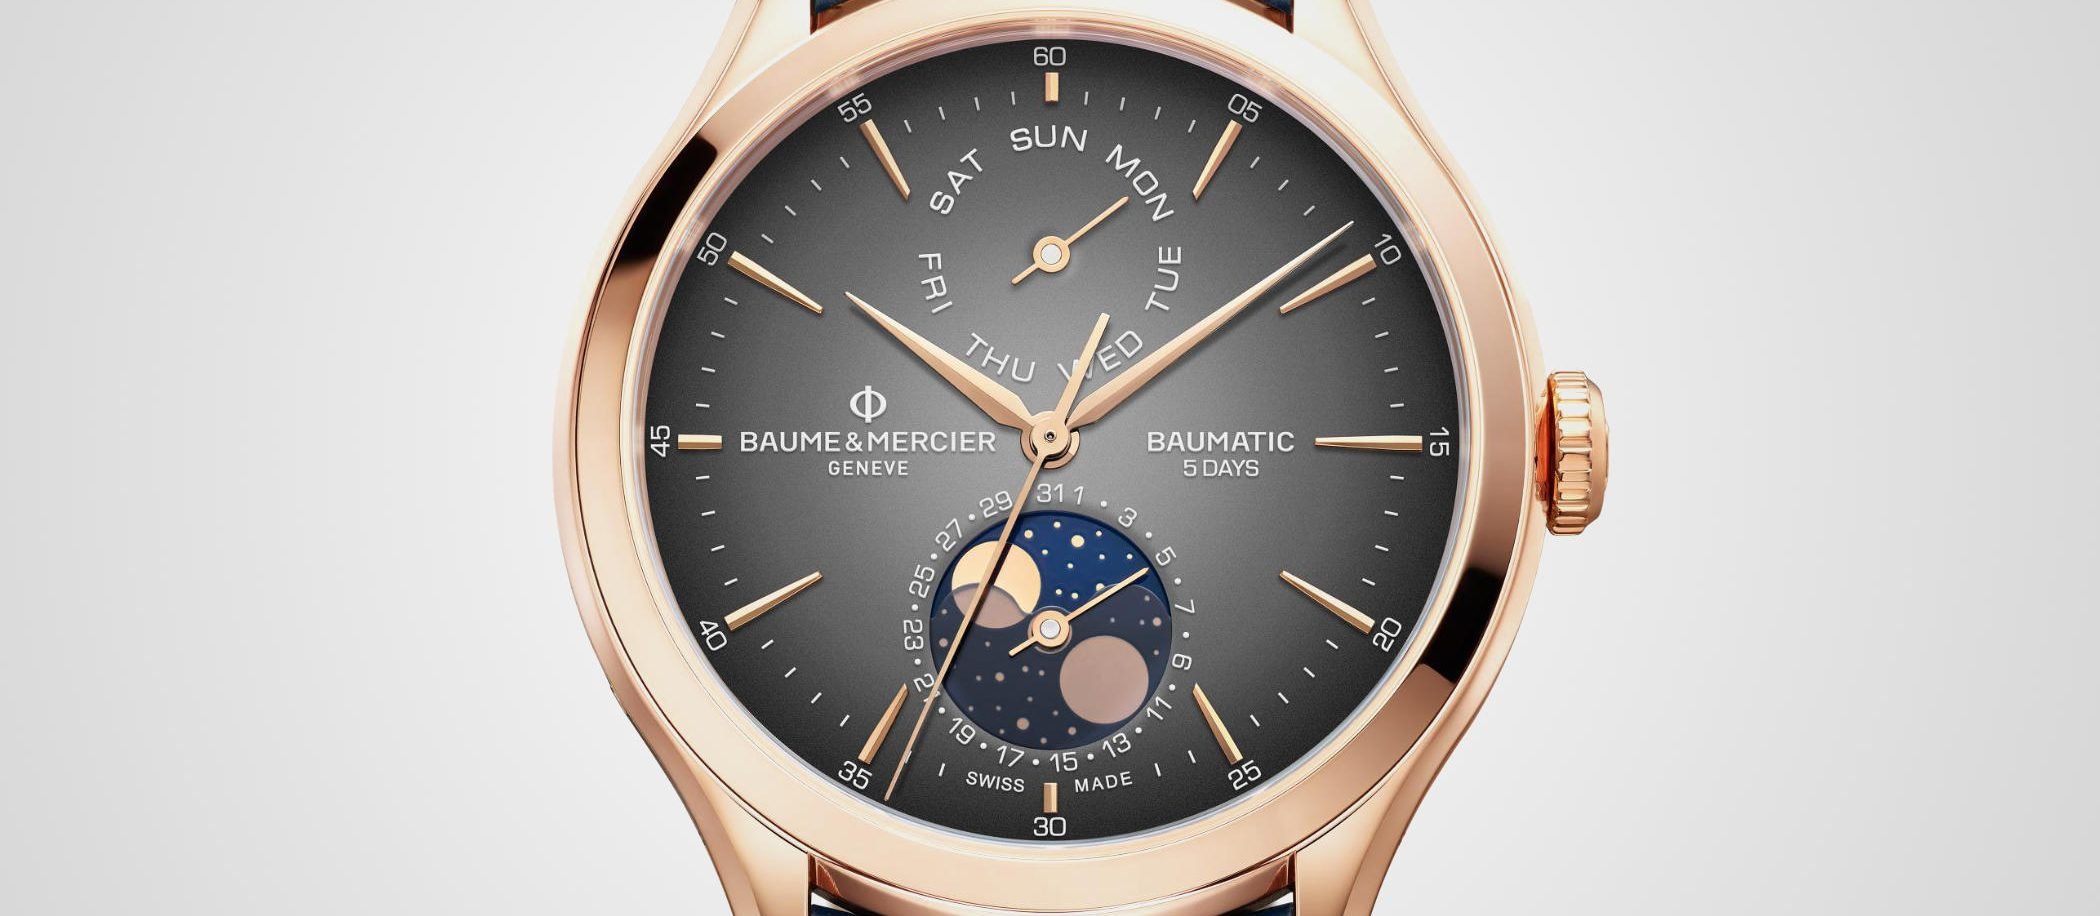 Baume & Mercier Clifton Baumatic Day-date Moon Phase